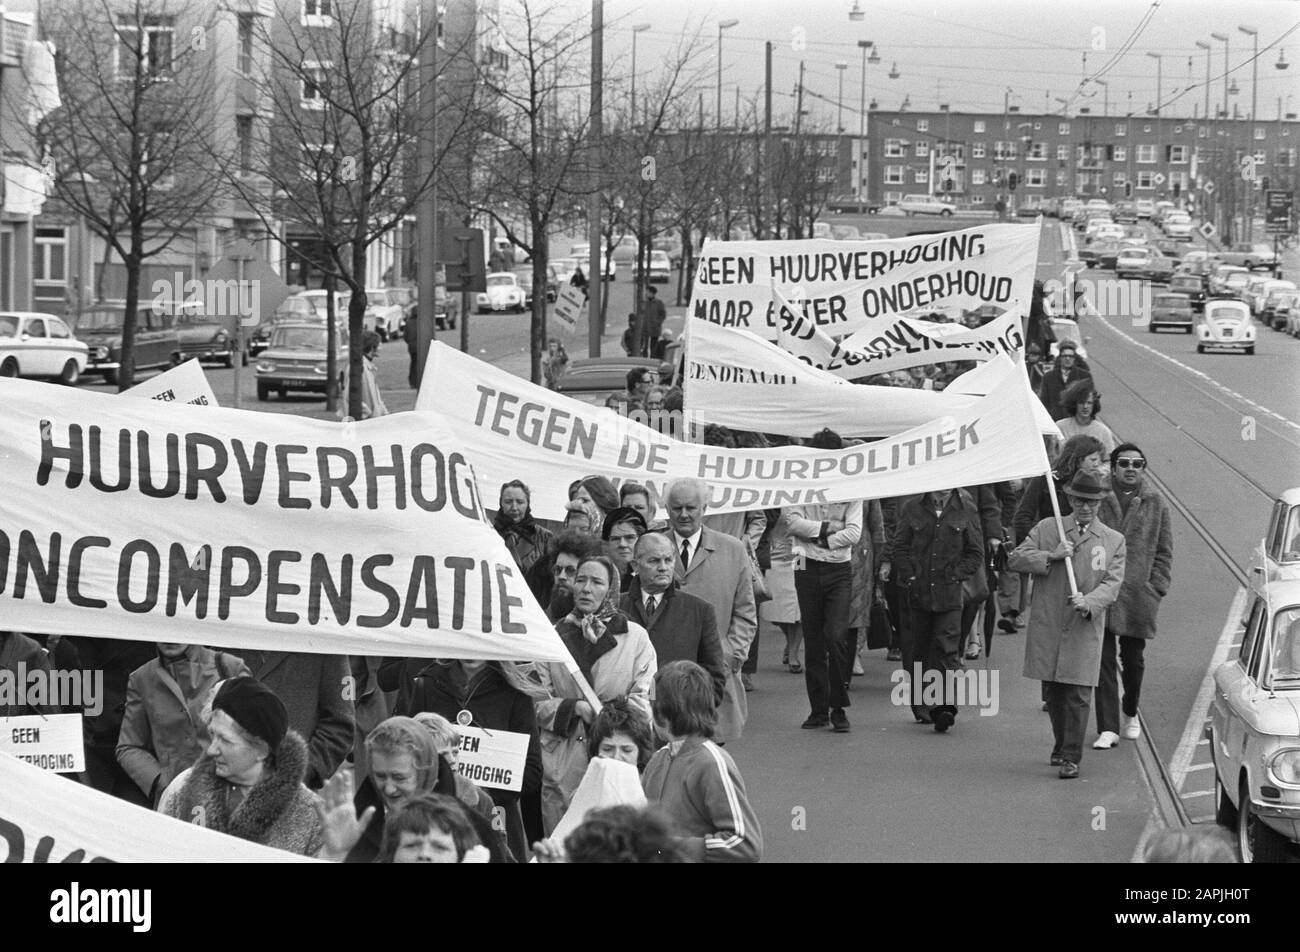 Demonstration in Amsterdam against housing policy and rental harmonization Date: April 15, 1972 Location: Amsterdam, Noord-Holland Keywords: demonstrations, banners Stock Photo